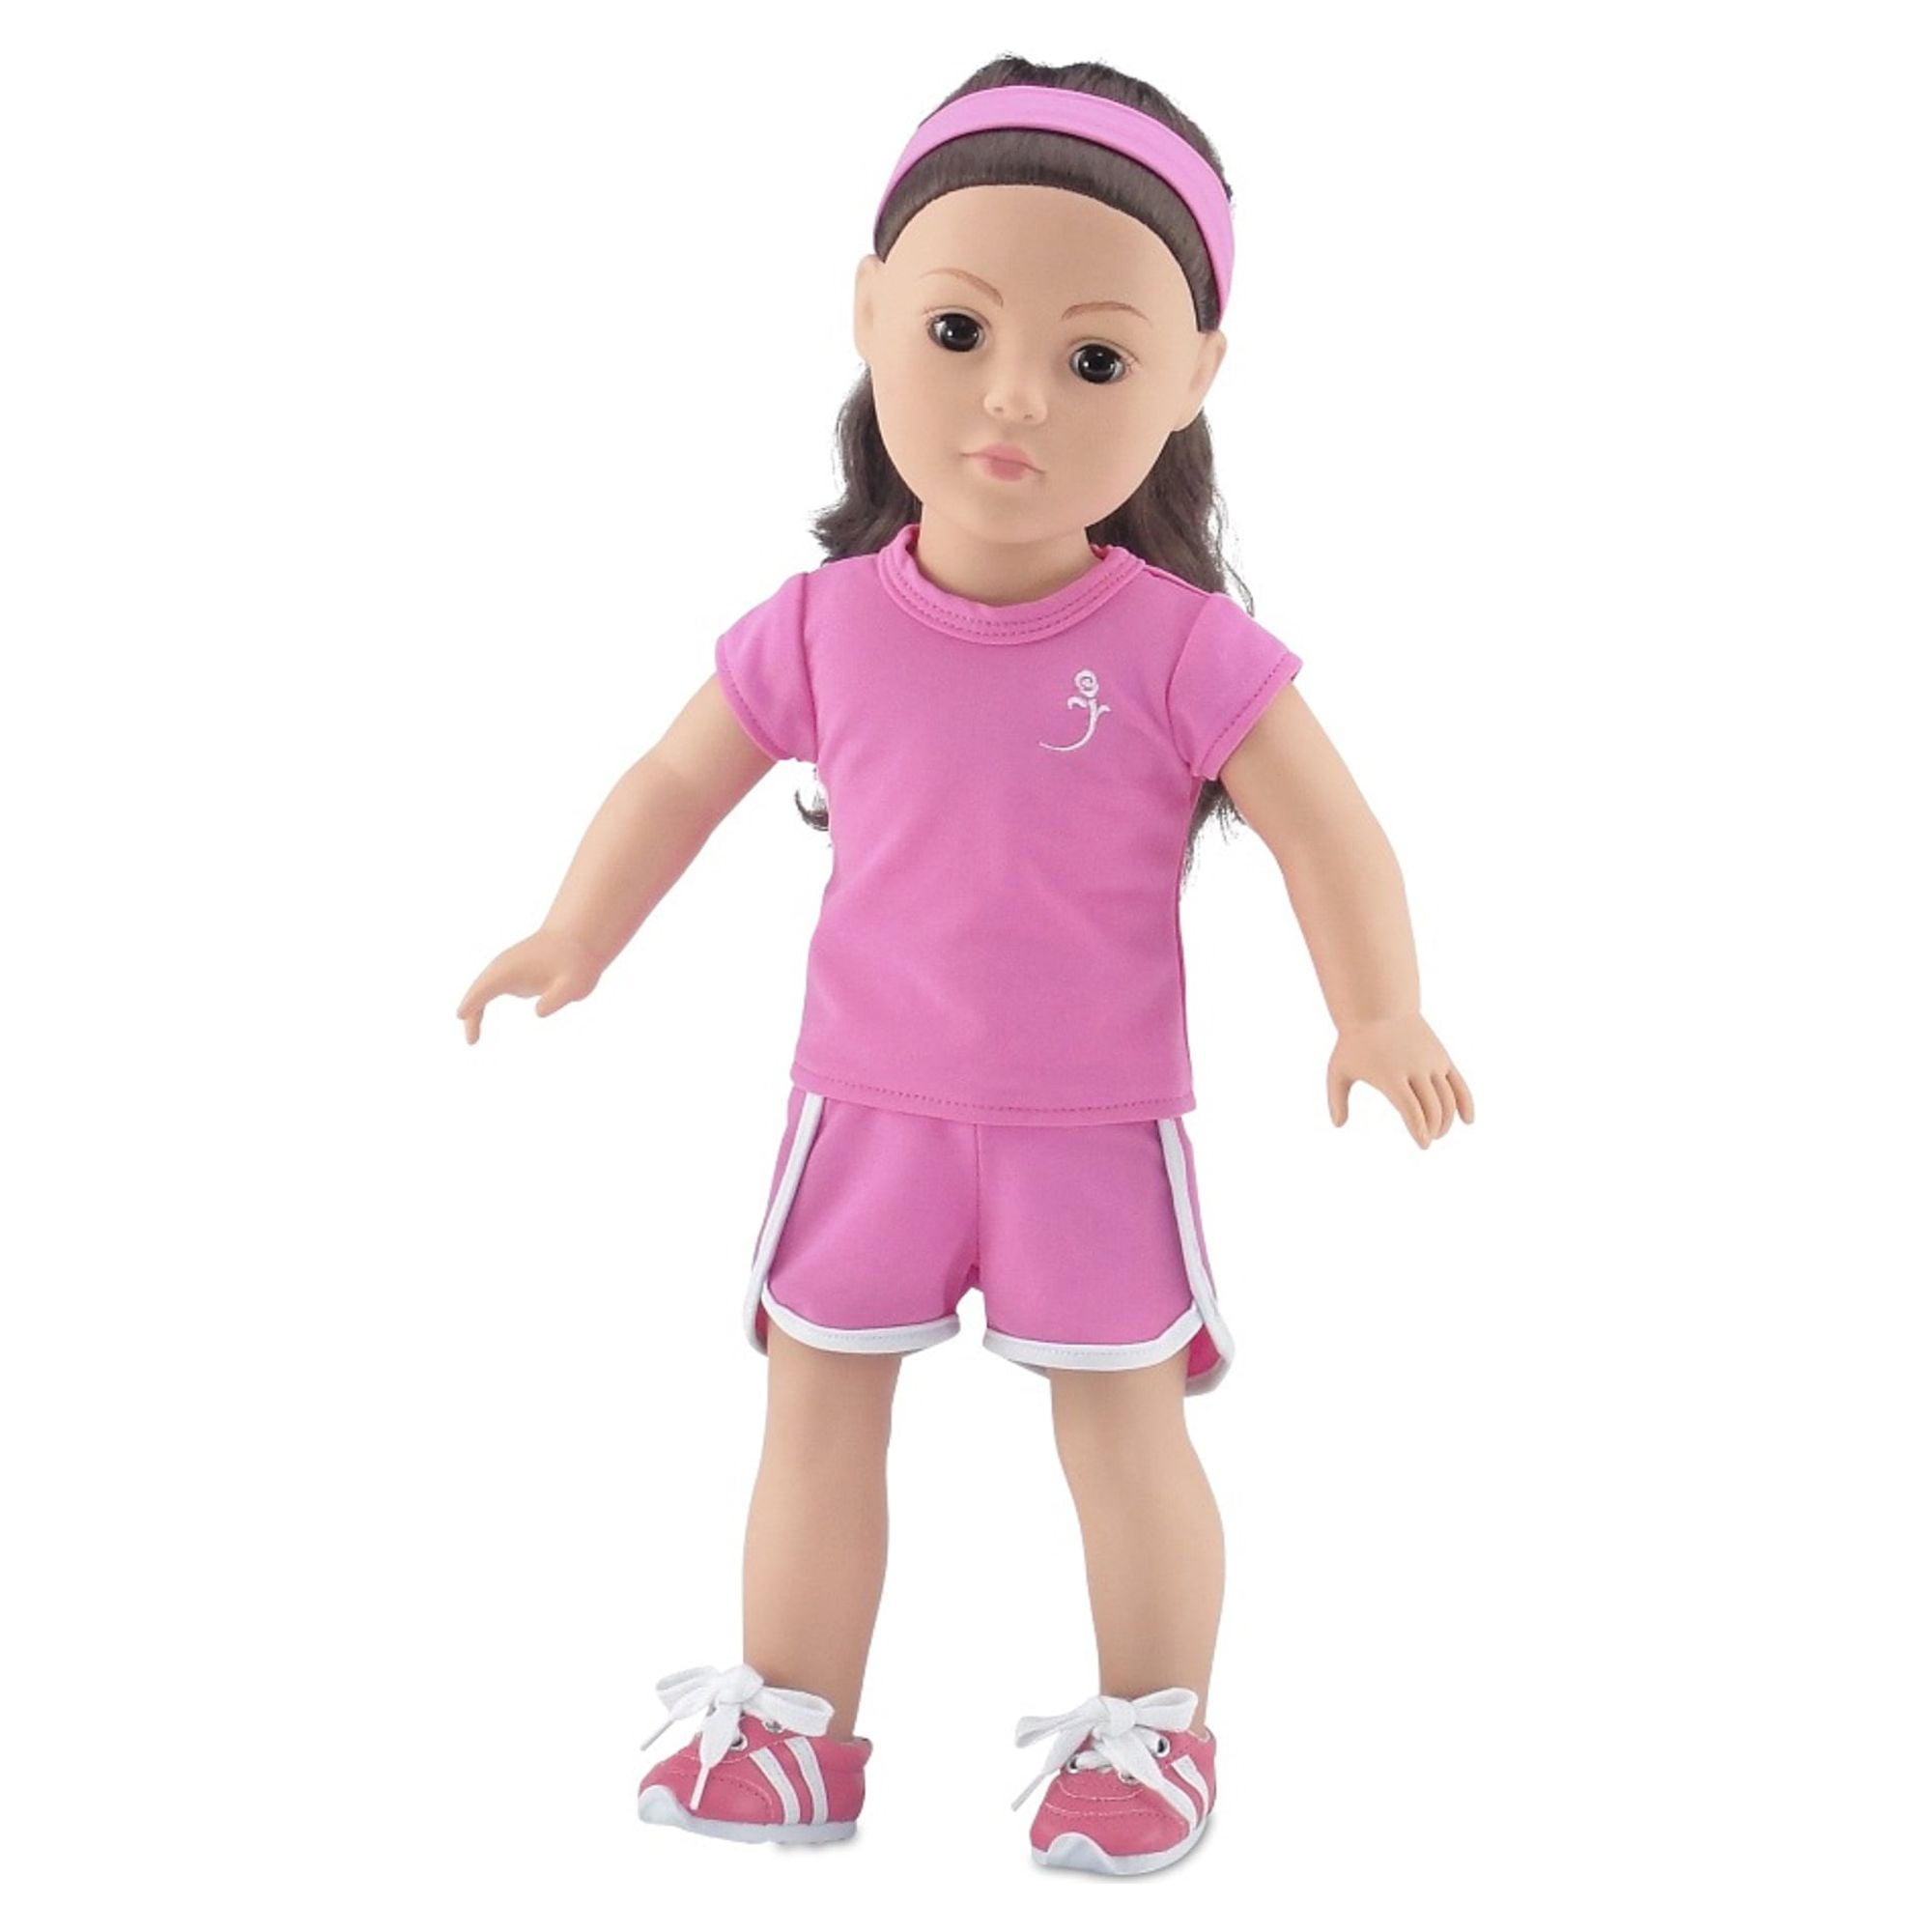 Happy Sun Salute, Yoga Outfit for 18-inch Dolls